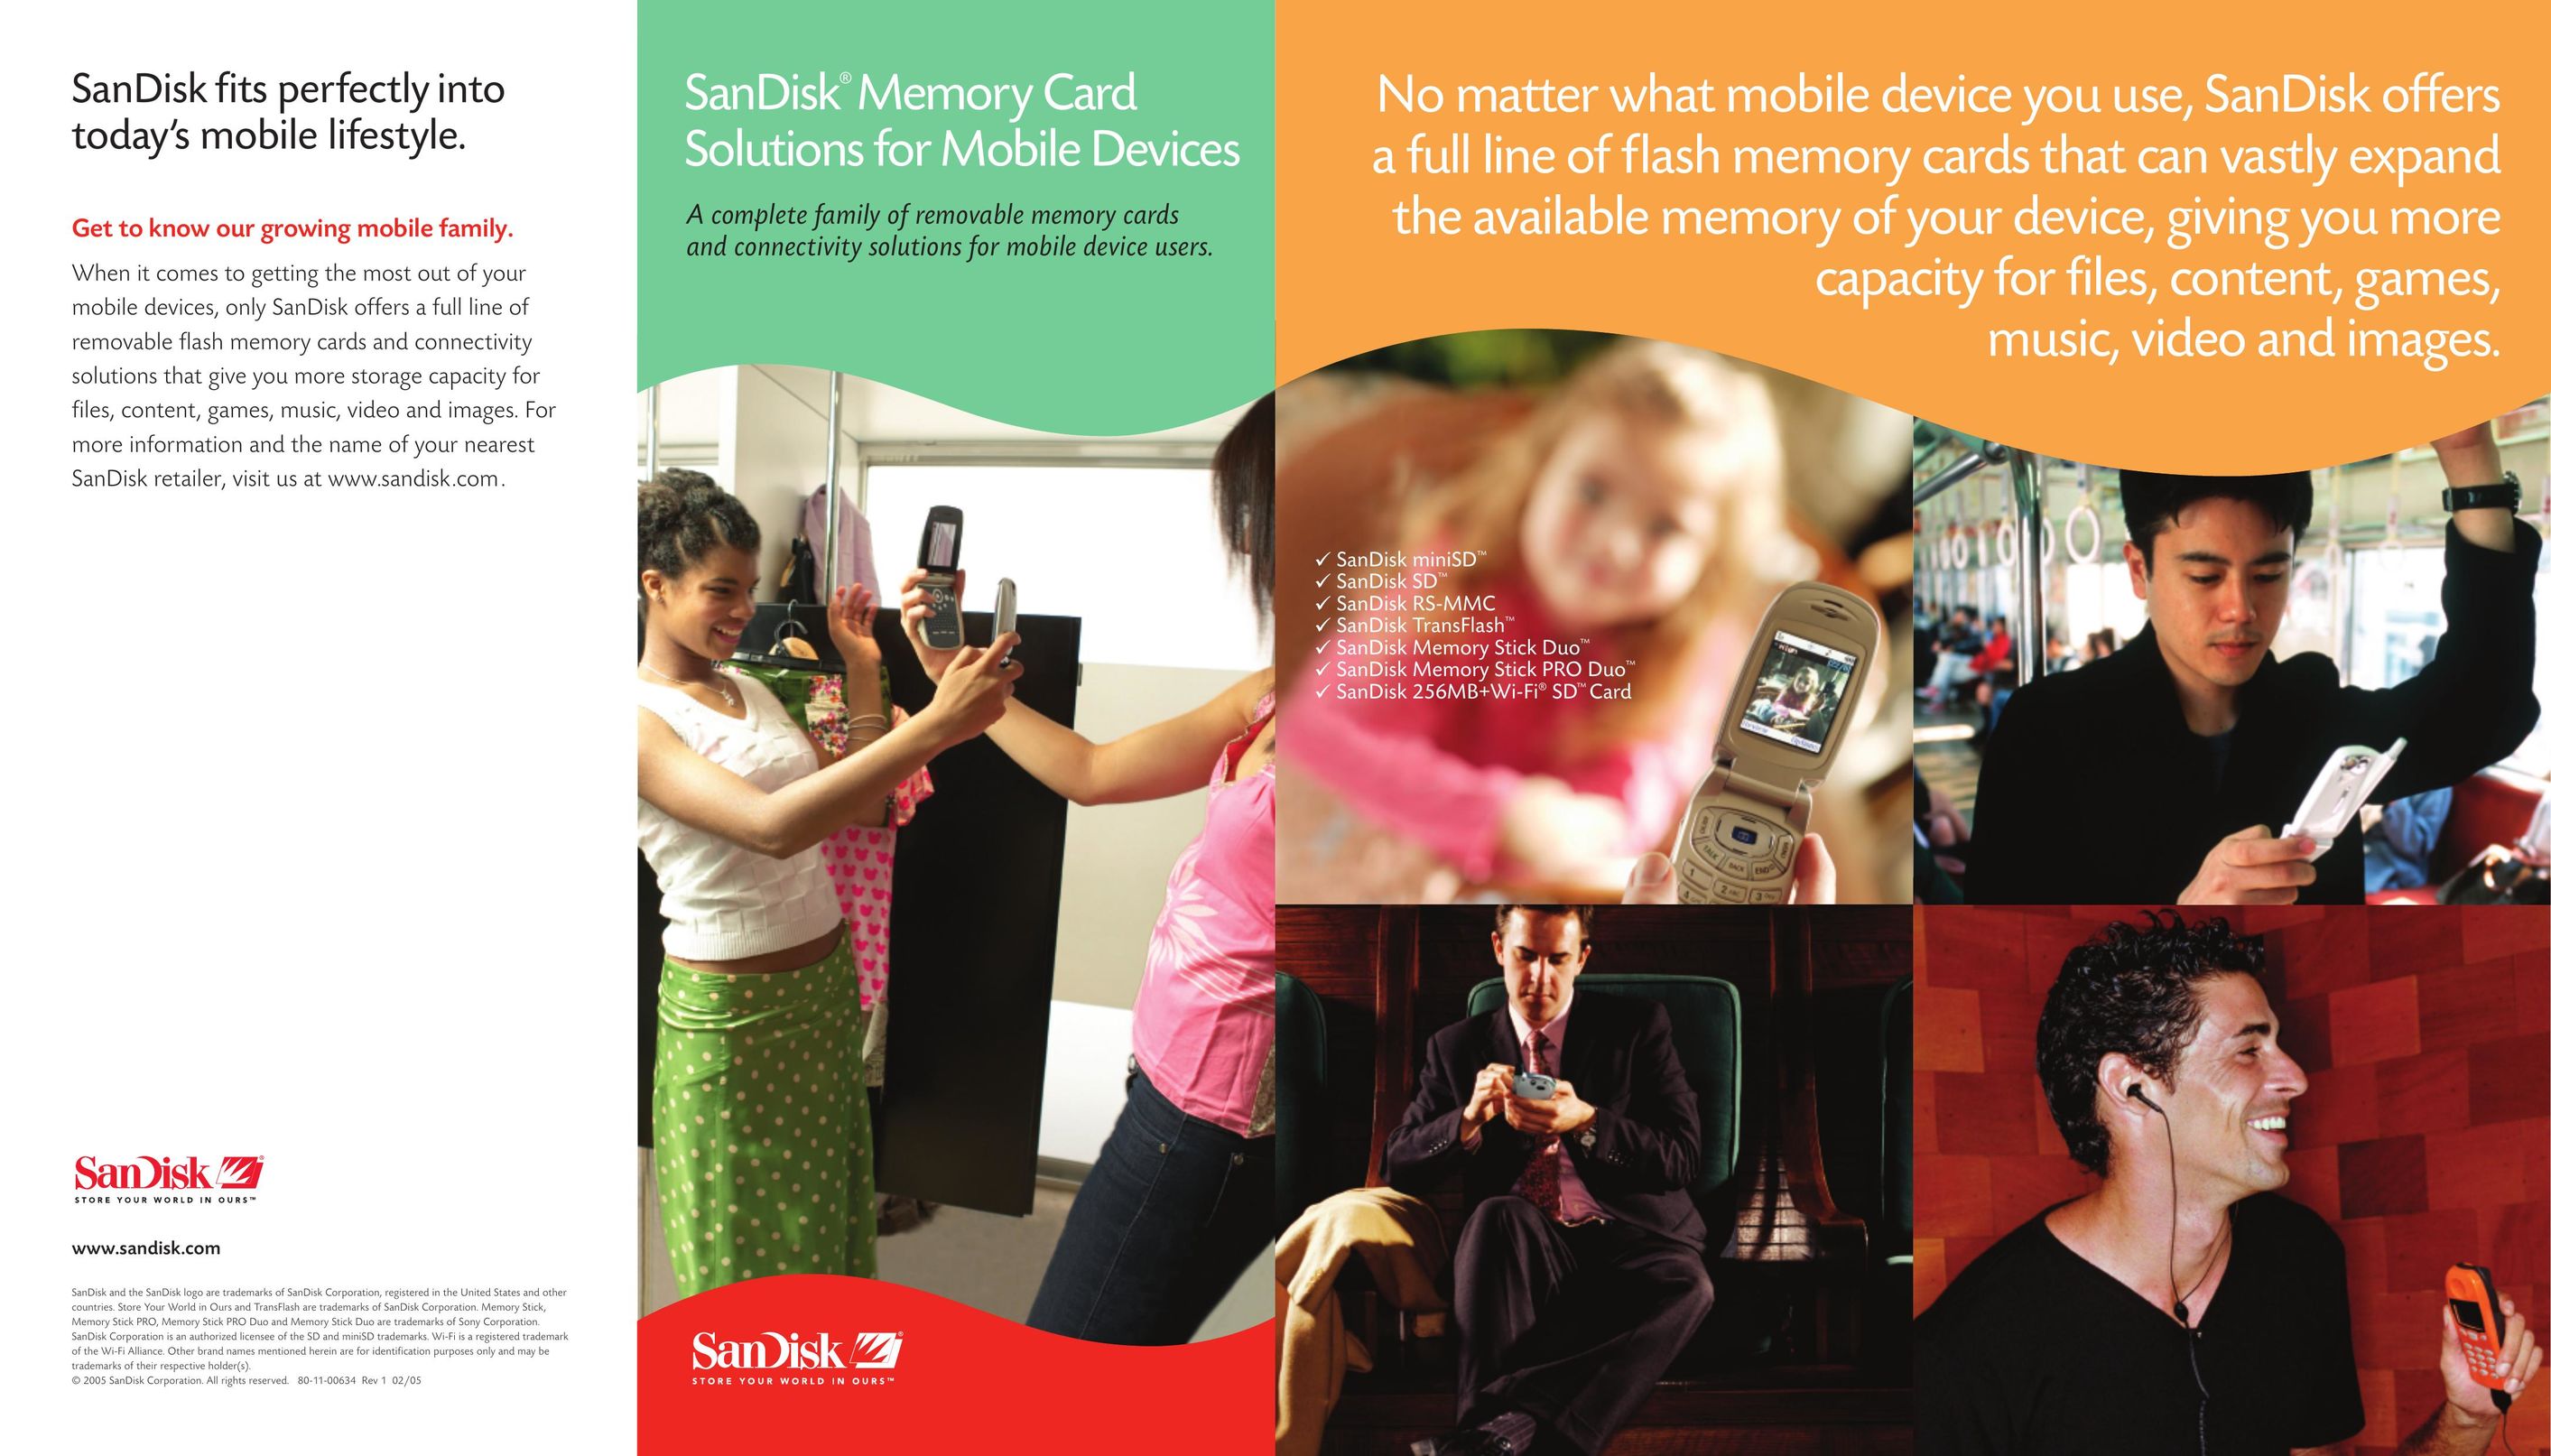 SanDisk Memory Stick Duo Cell Phone Accessories User Manual